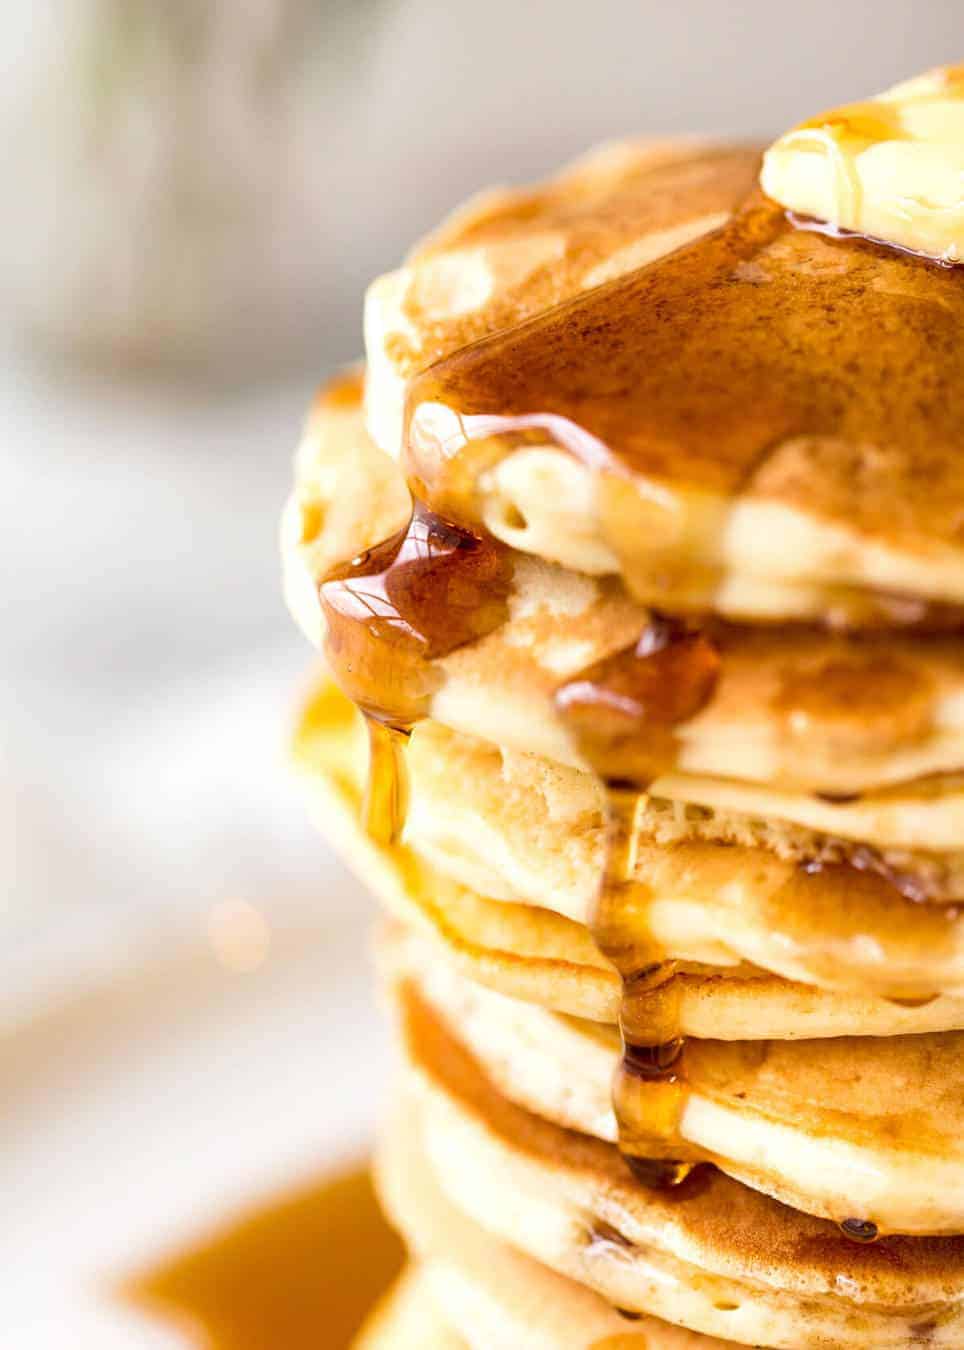 Simple, fluffy pancakes. What will you top yours with? recipetineats.com